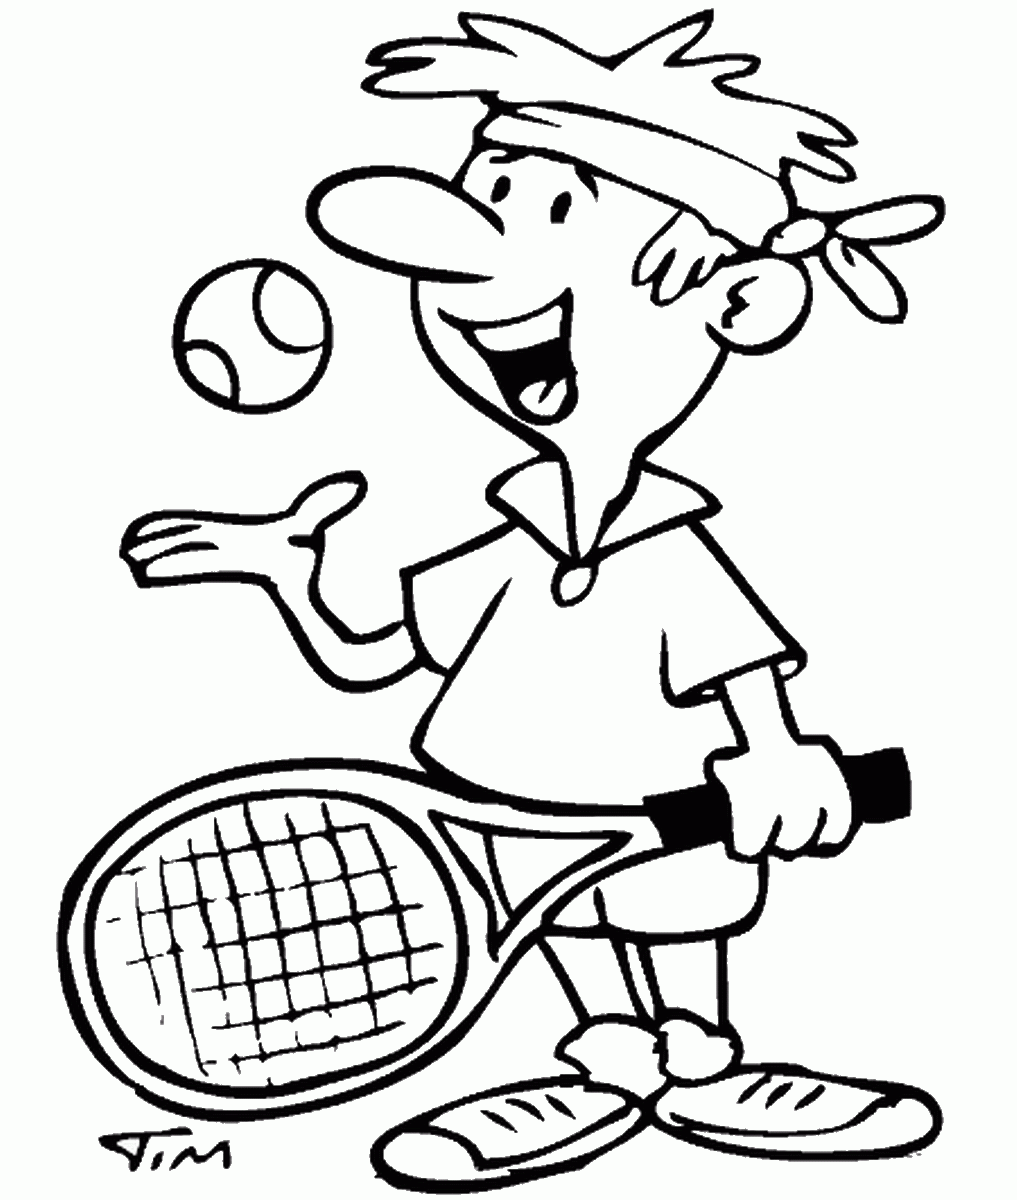 Sports Coloring Pages sports_cl_130 Printable 2021 5805 Coloring4free